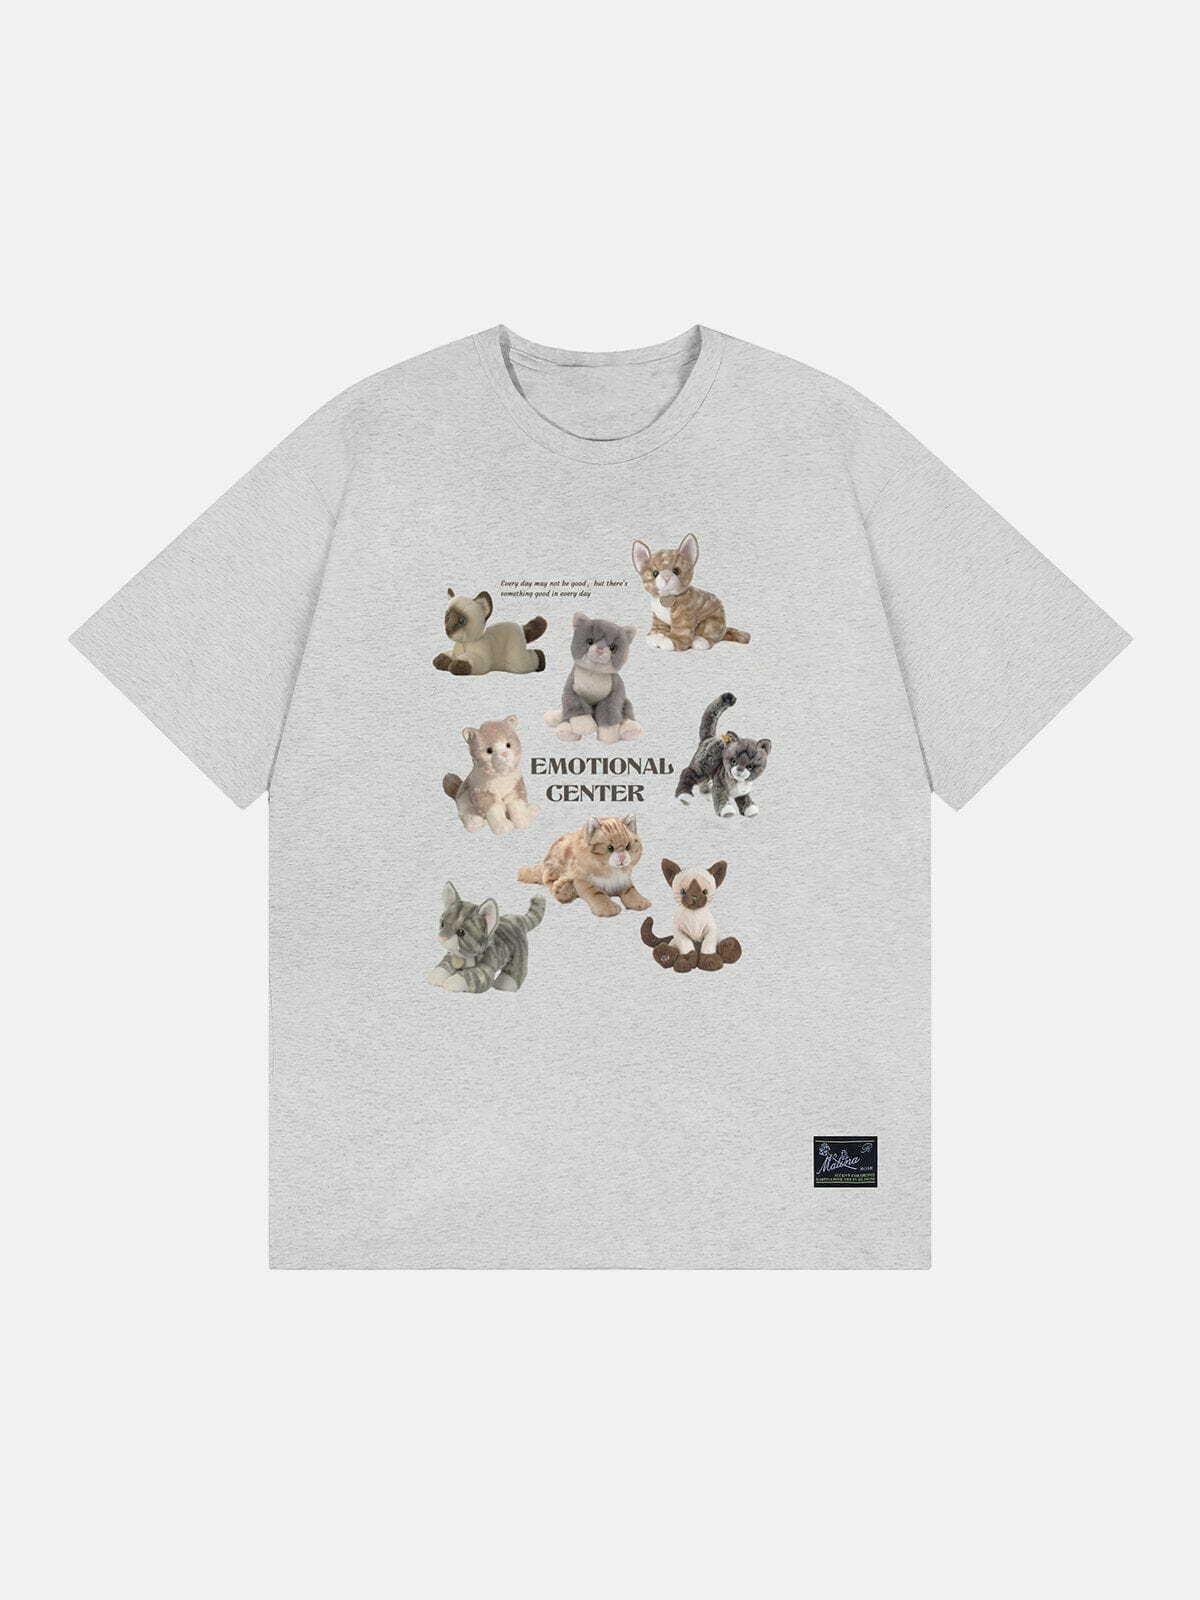 iconic male cats print tee edgy streetwear for trendsetters 4023